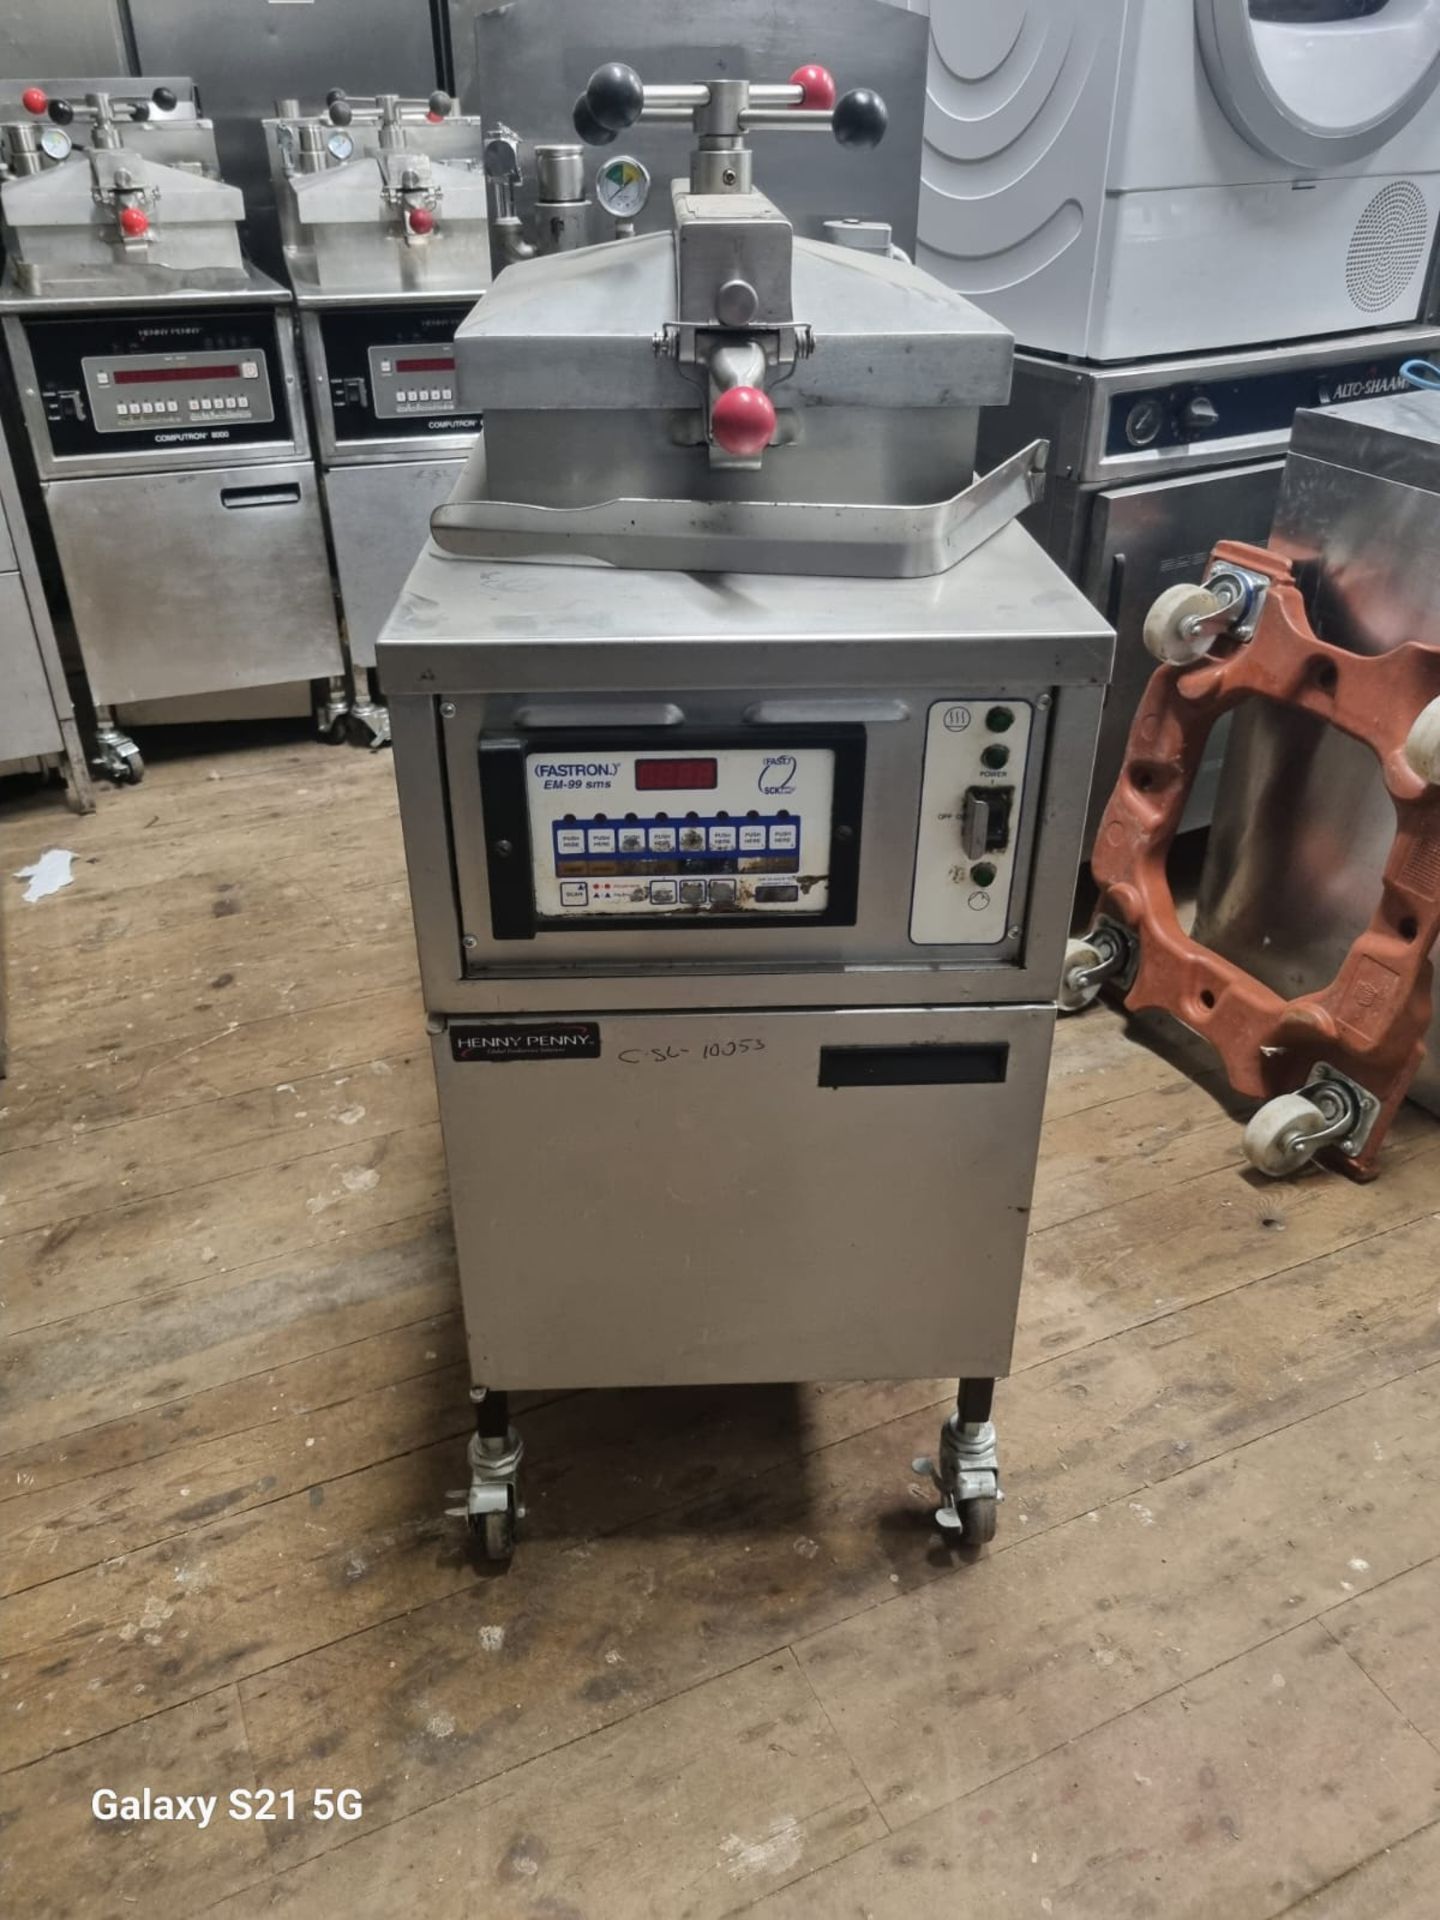 HENNY PENNY PRESSURE GAS FRYER - FASTRON COMPUTER - HAS BEEN FULLY REFURBISHED